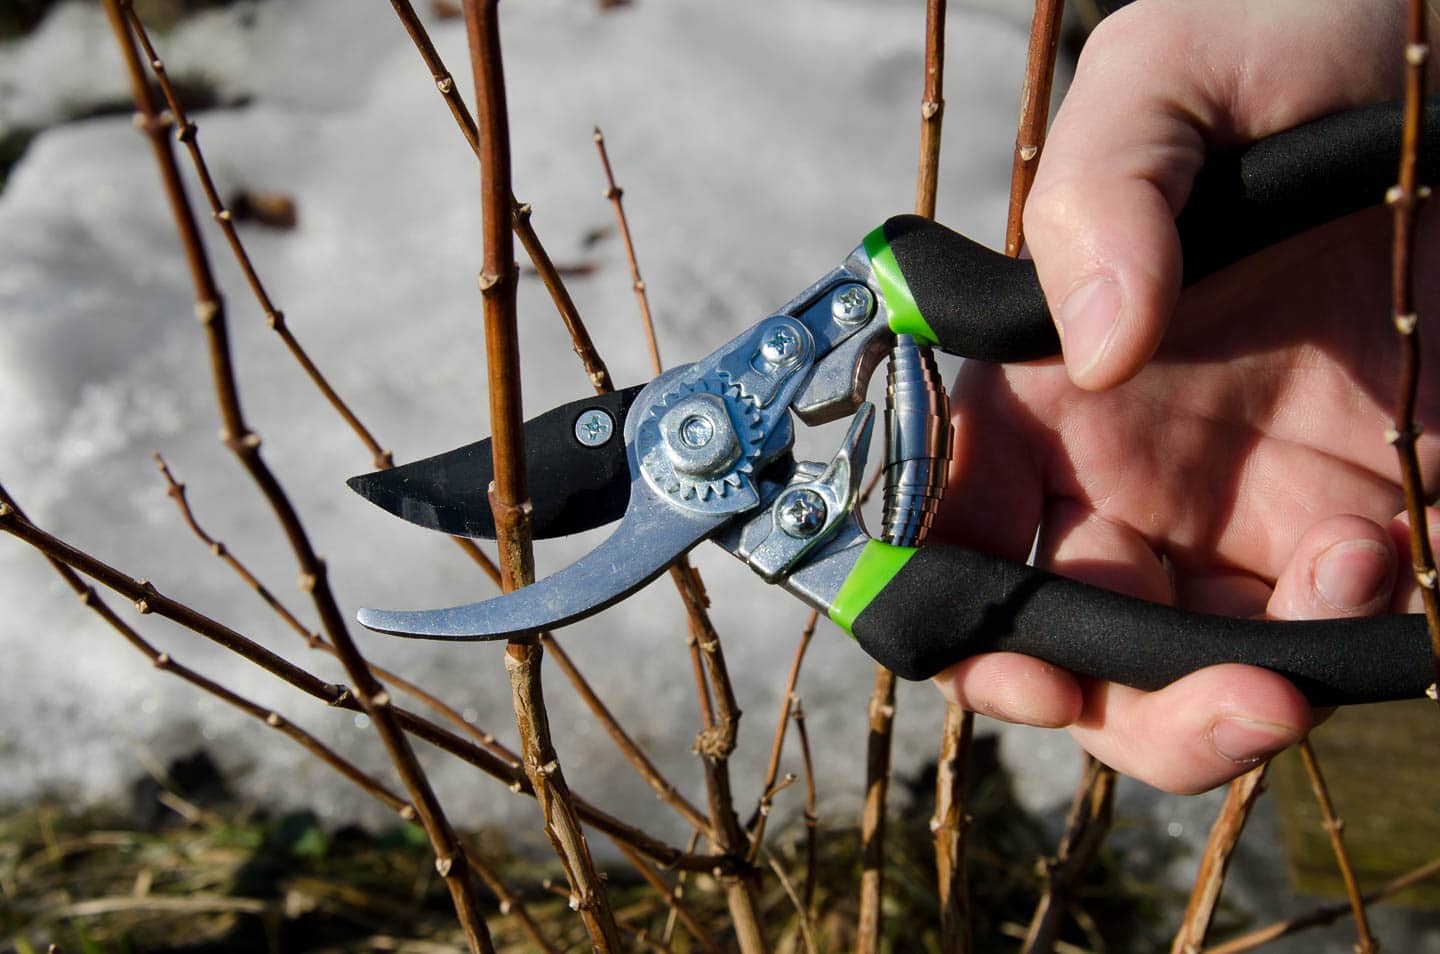 Bush being pruned with pruning shears